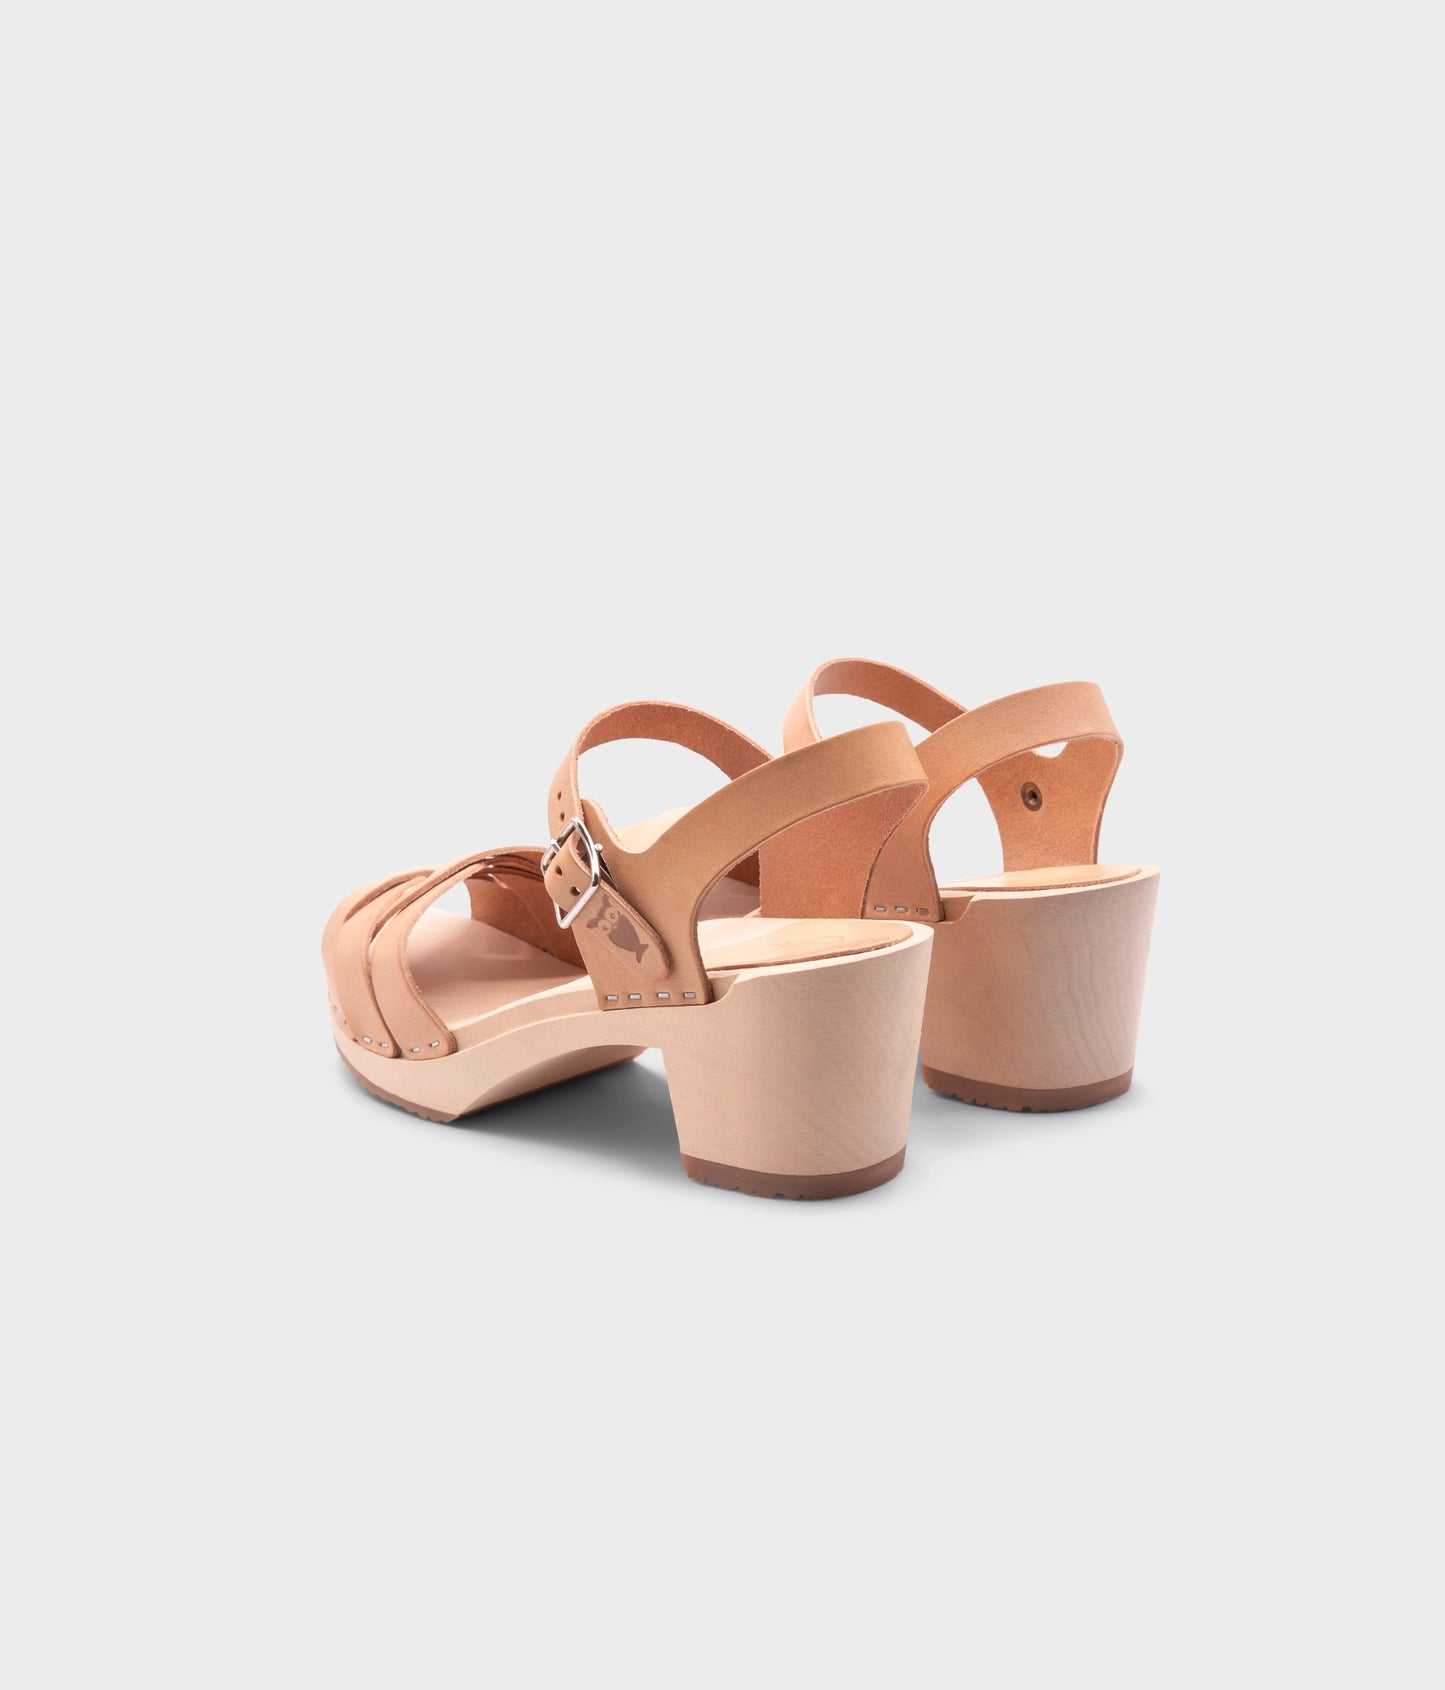 high heeled clog sandals in ecru beige vegetable tanned leather with an open-toe stapled on a light wooden base